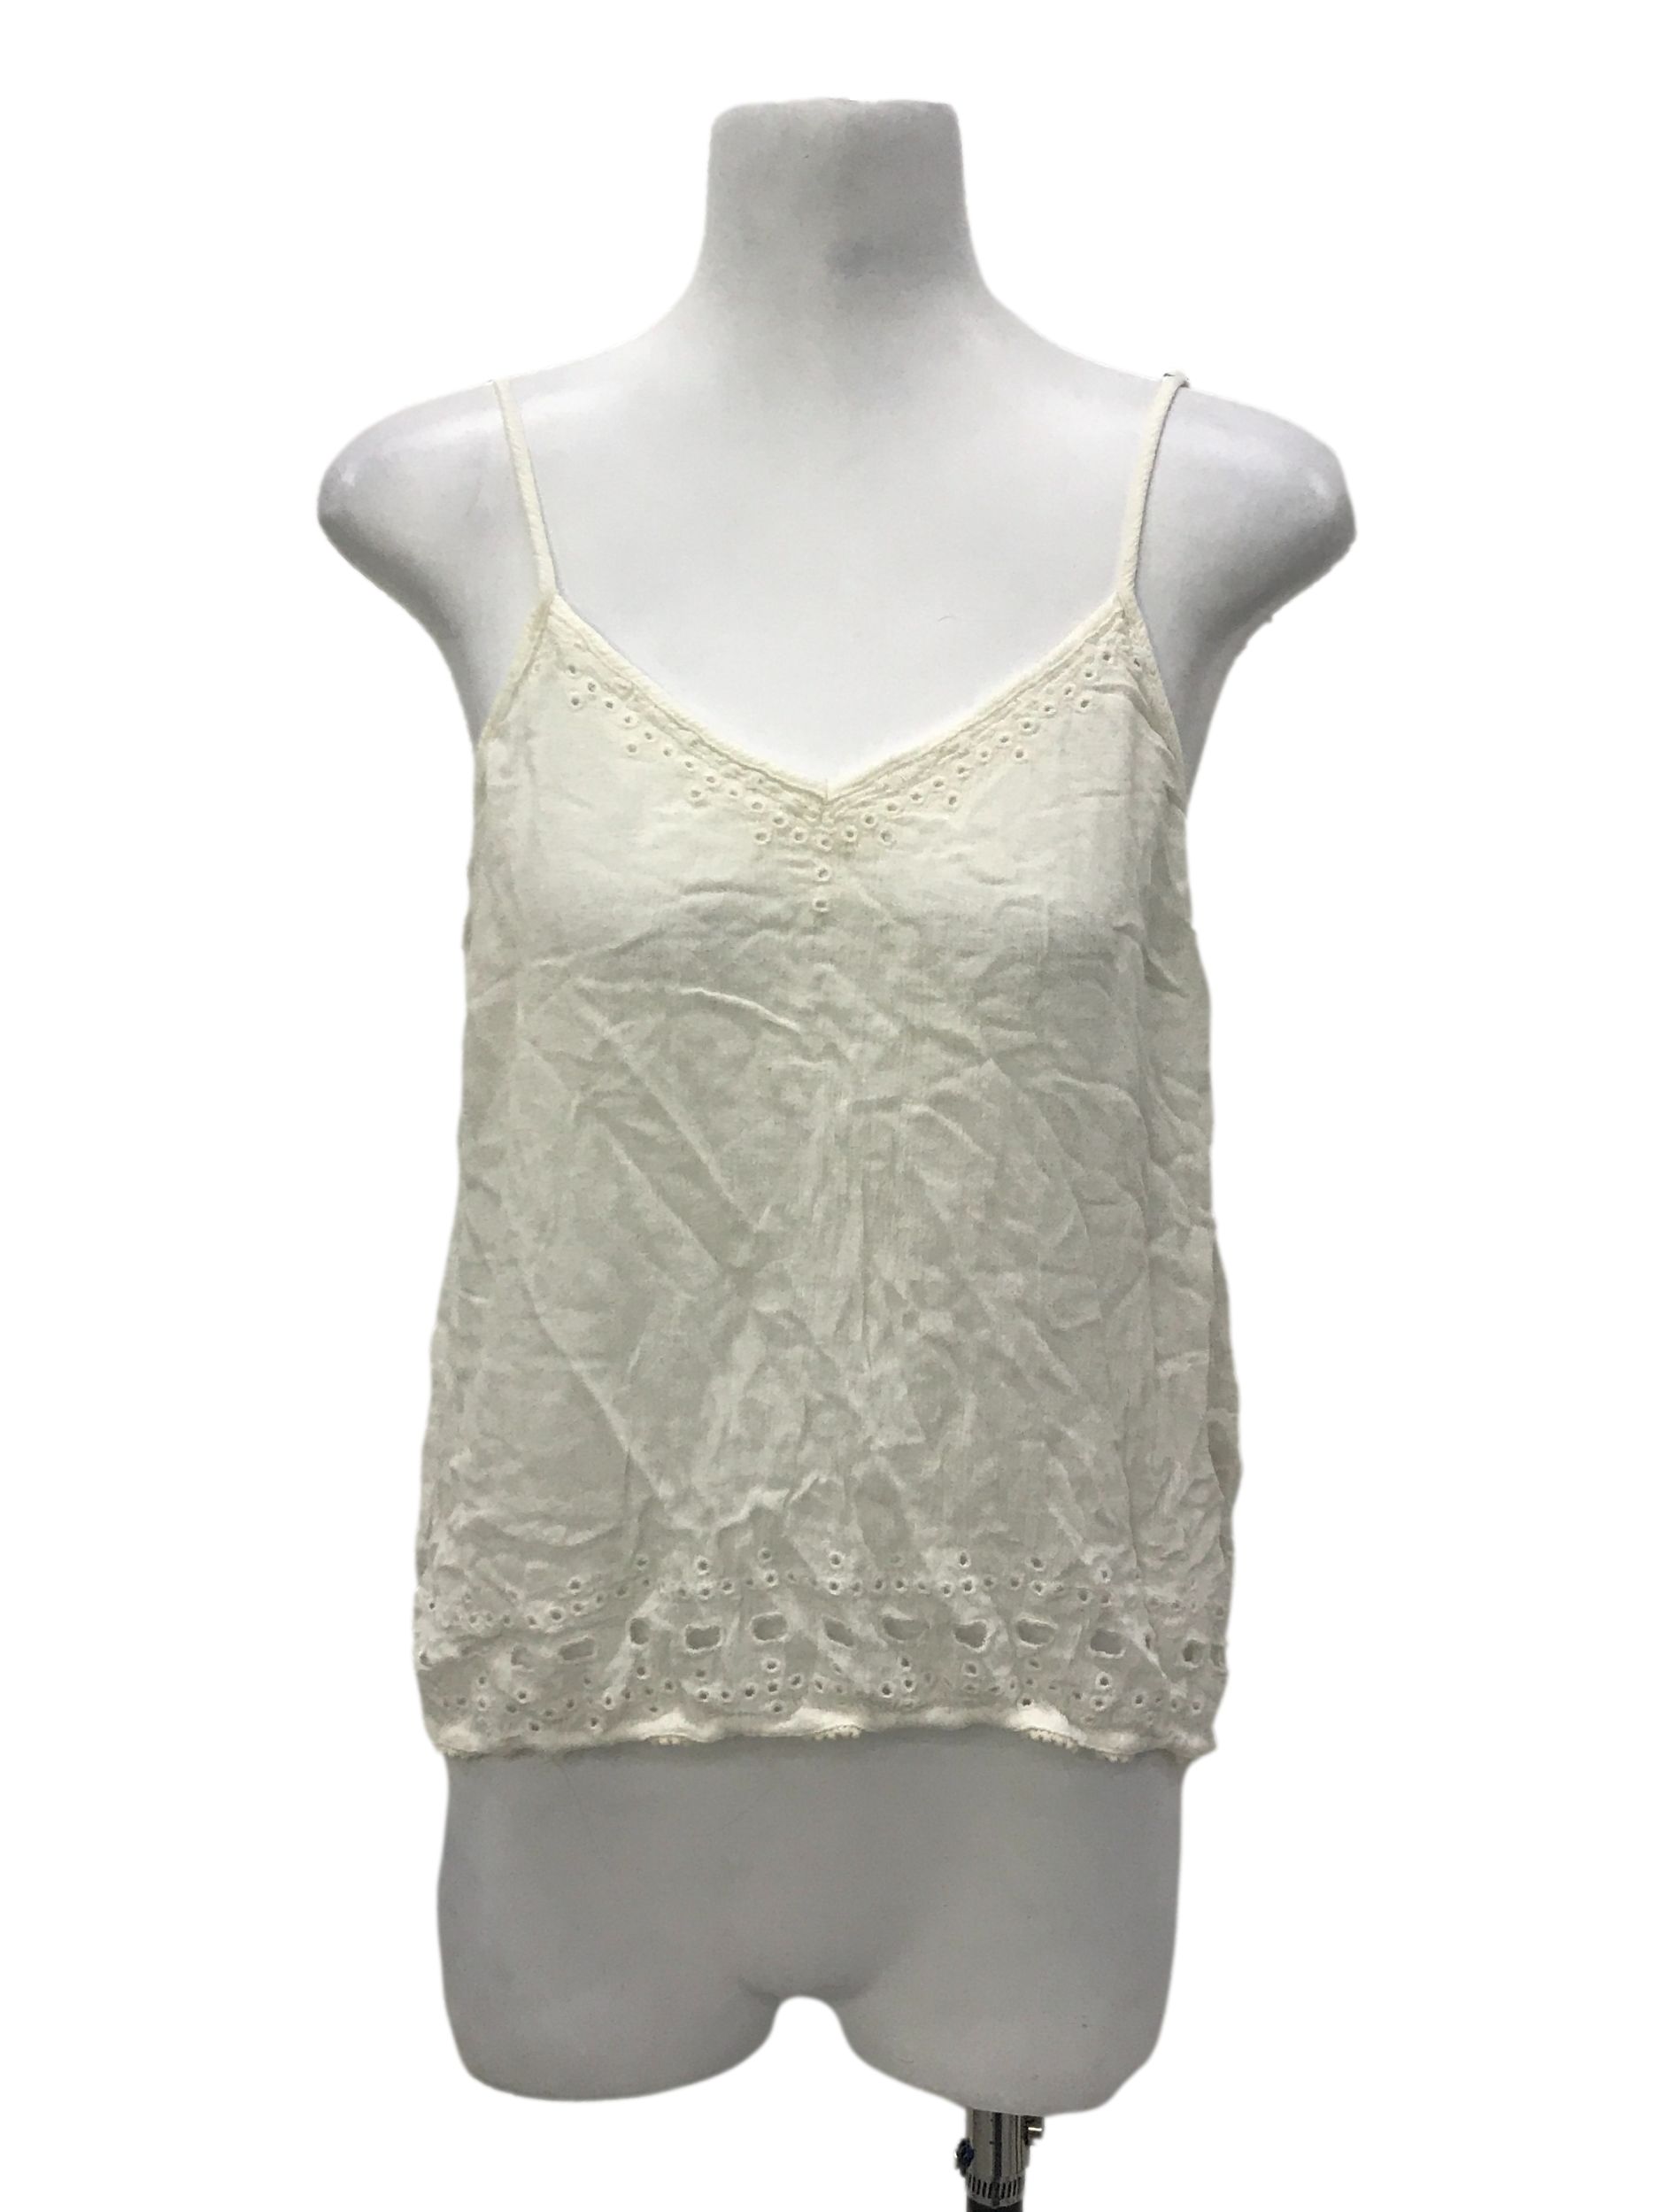 Cotton:On lace edge cami top in green